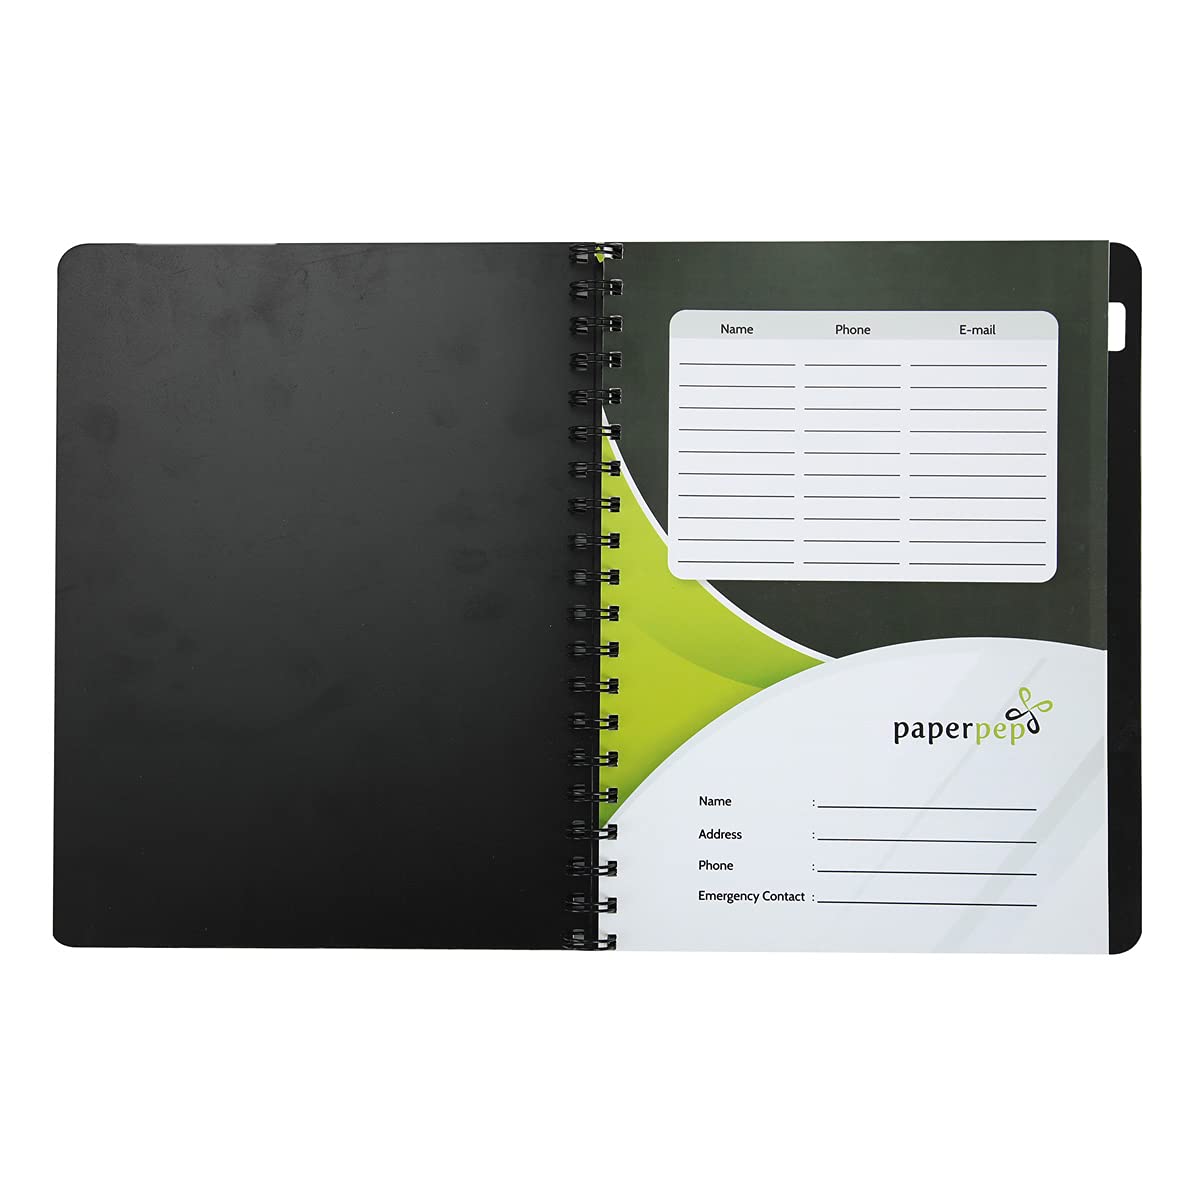 Paper Pep Nouvi 1 Subject Single Ruled 70GSM 160 Pages B5 Notebook (Pack of 2)